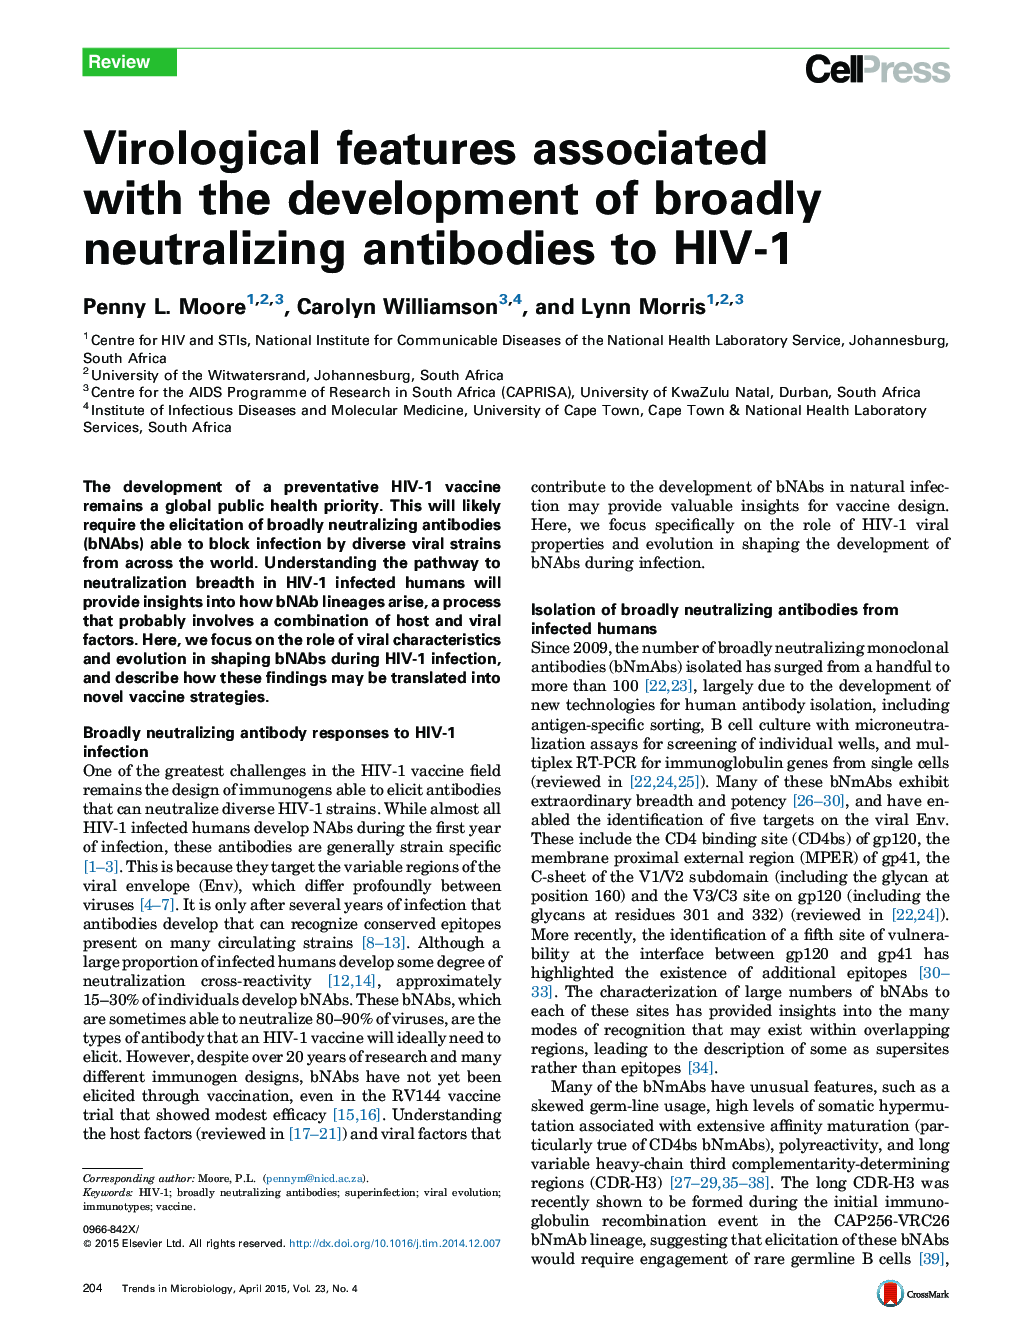 Virological features associated with the development of broadly neutralizing antibodies to HIV-1